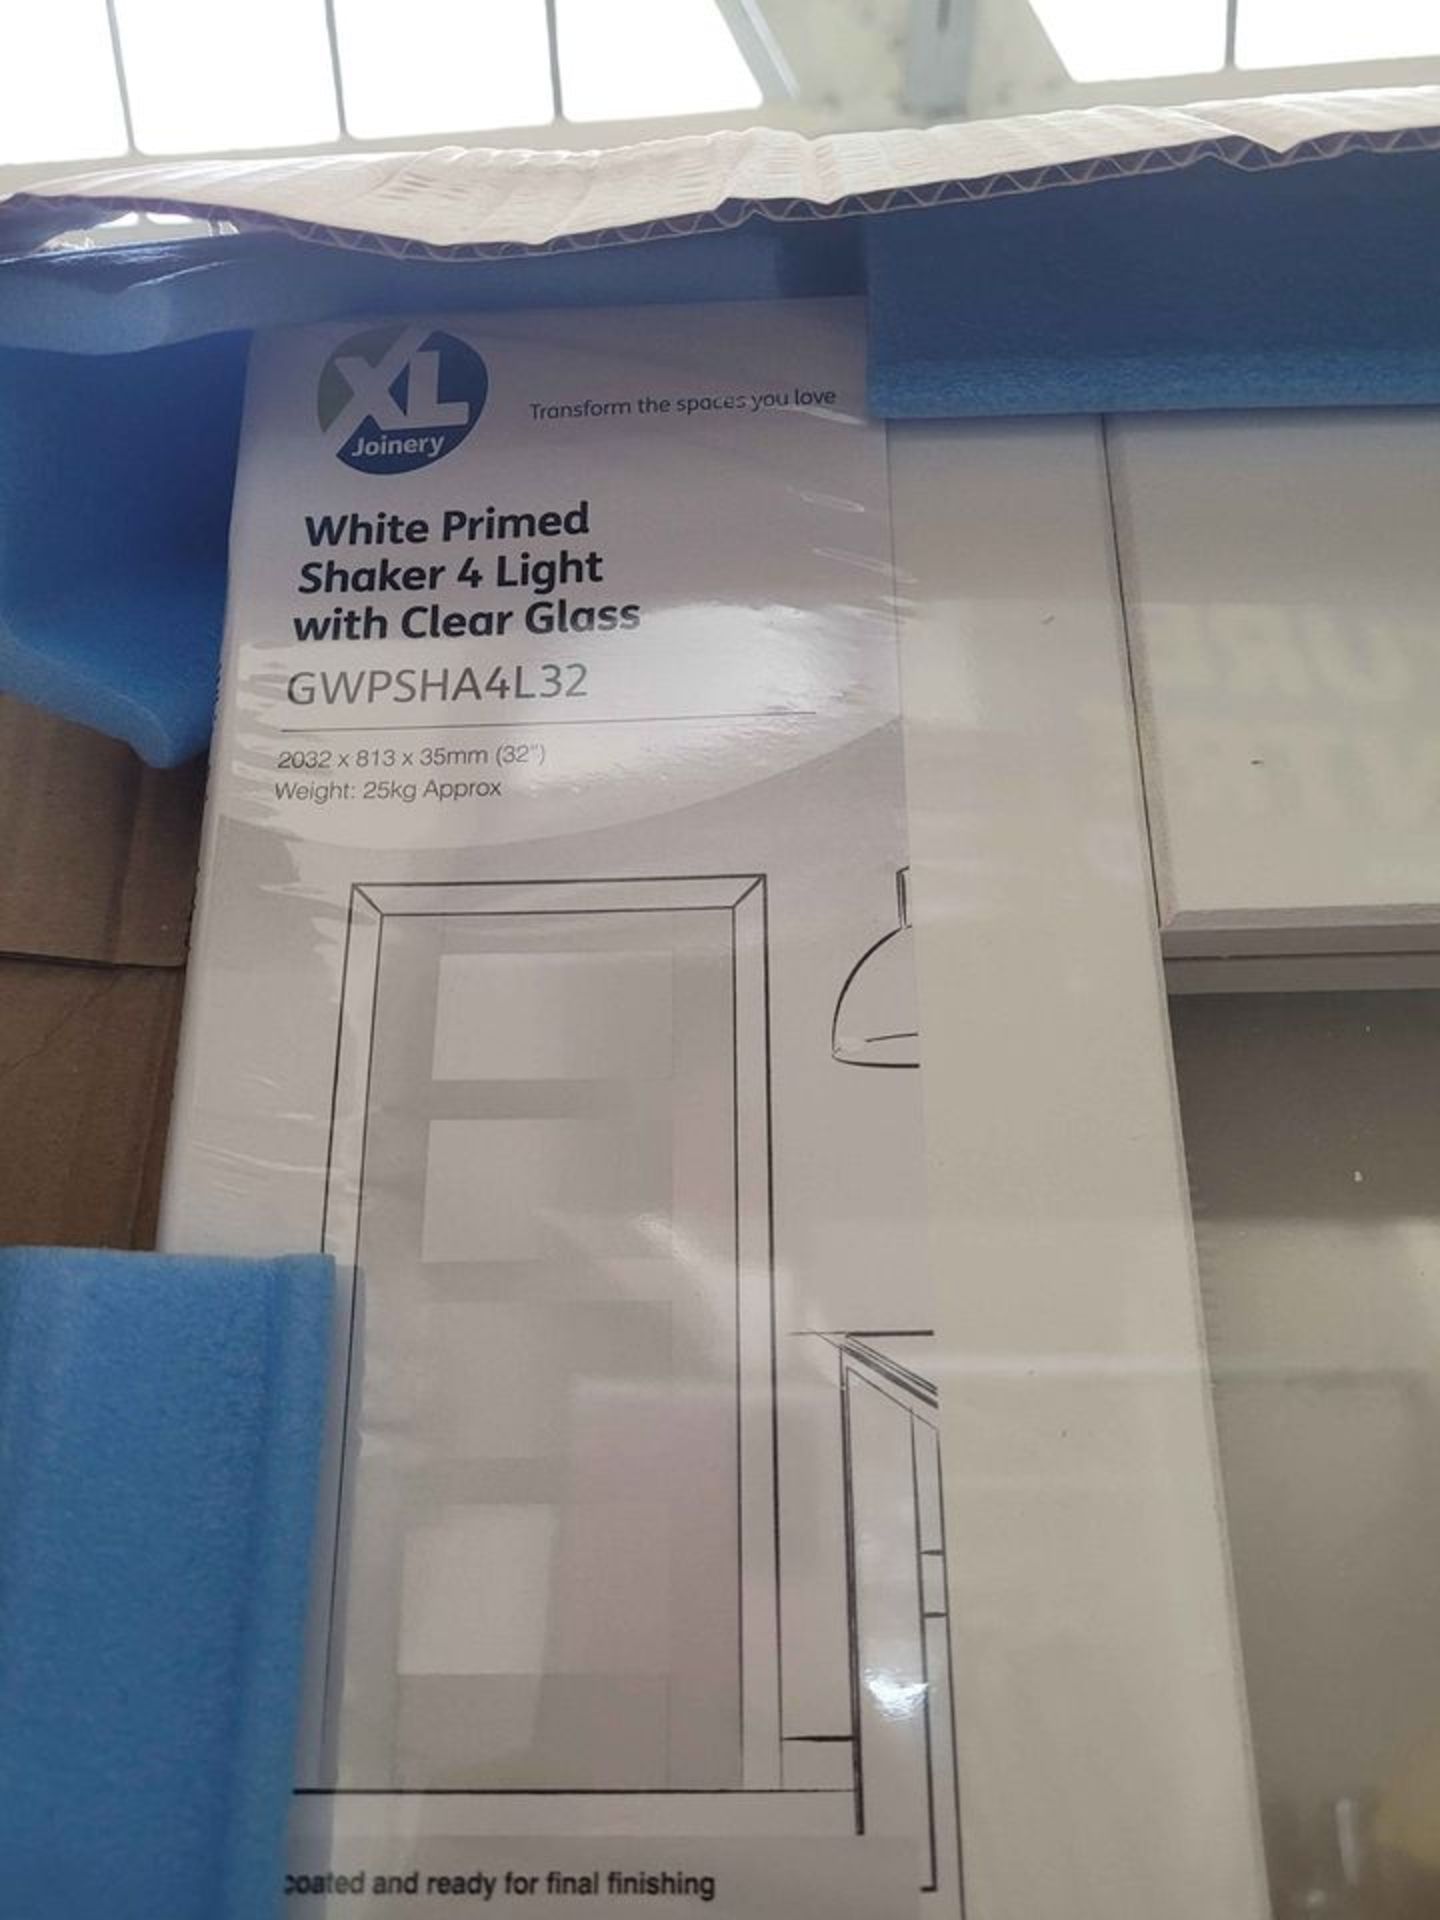 2 x Shaker 4 Light Internal White Primed Door with Clear Glass GWPSHA4L32 2032 x 813 x 35mm (32")